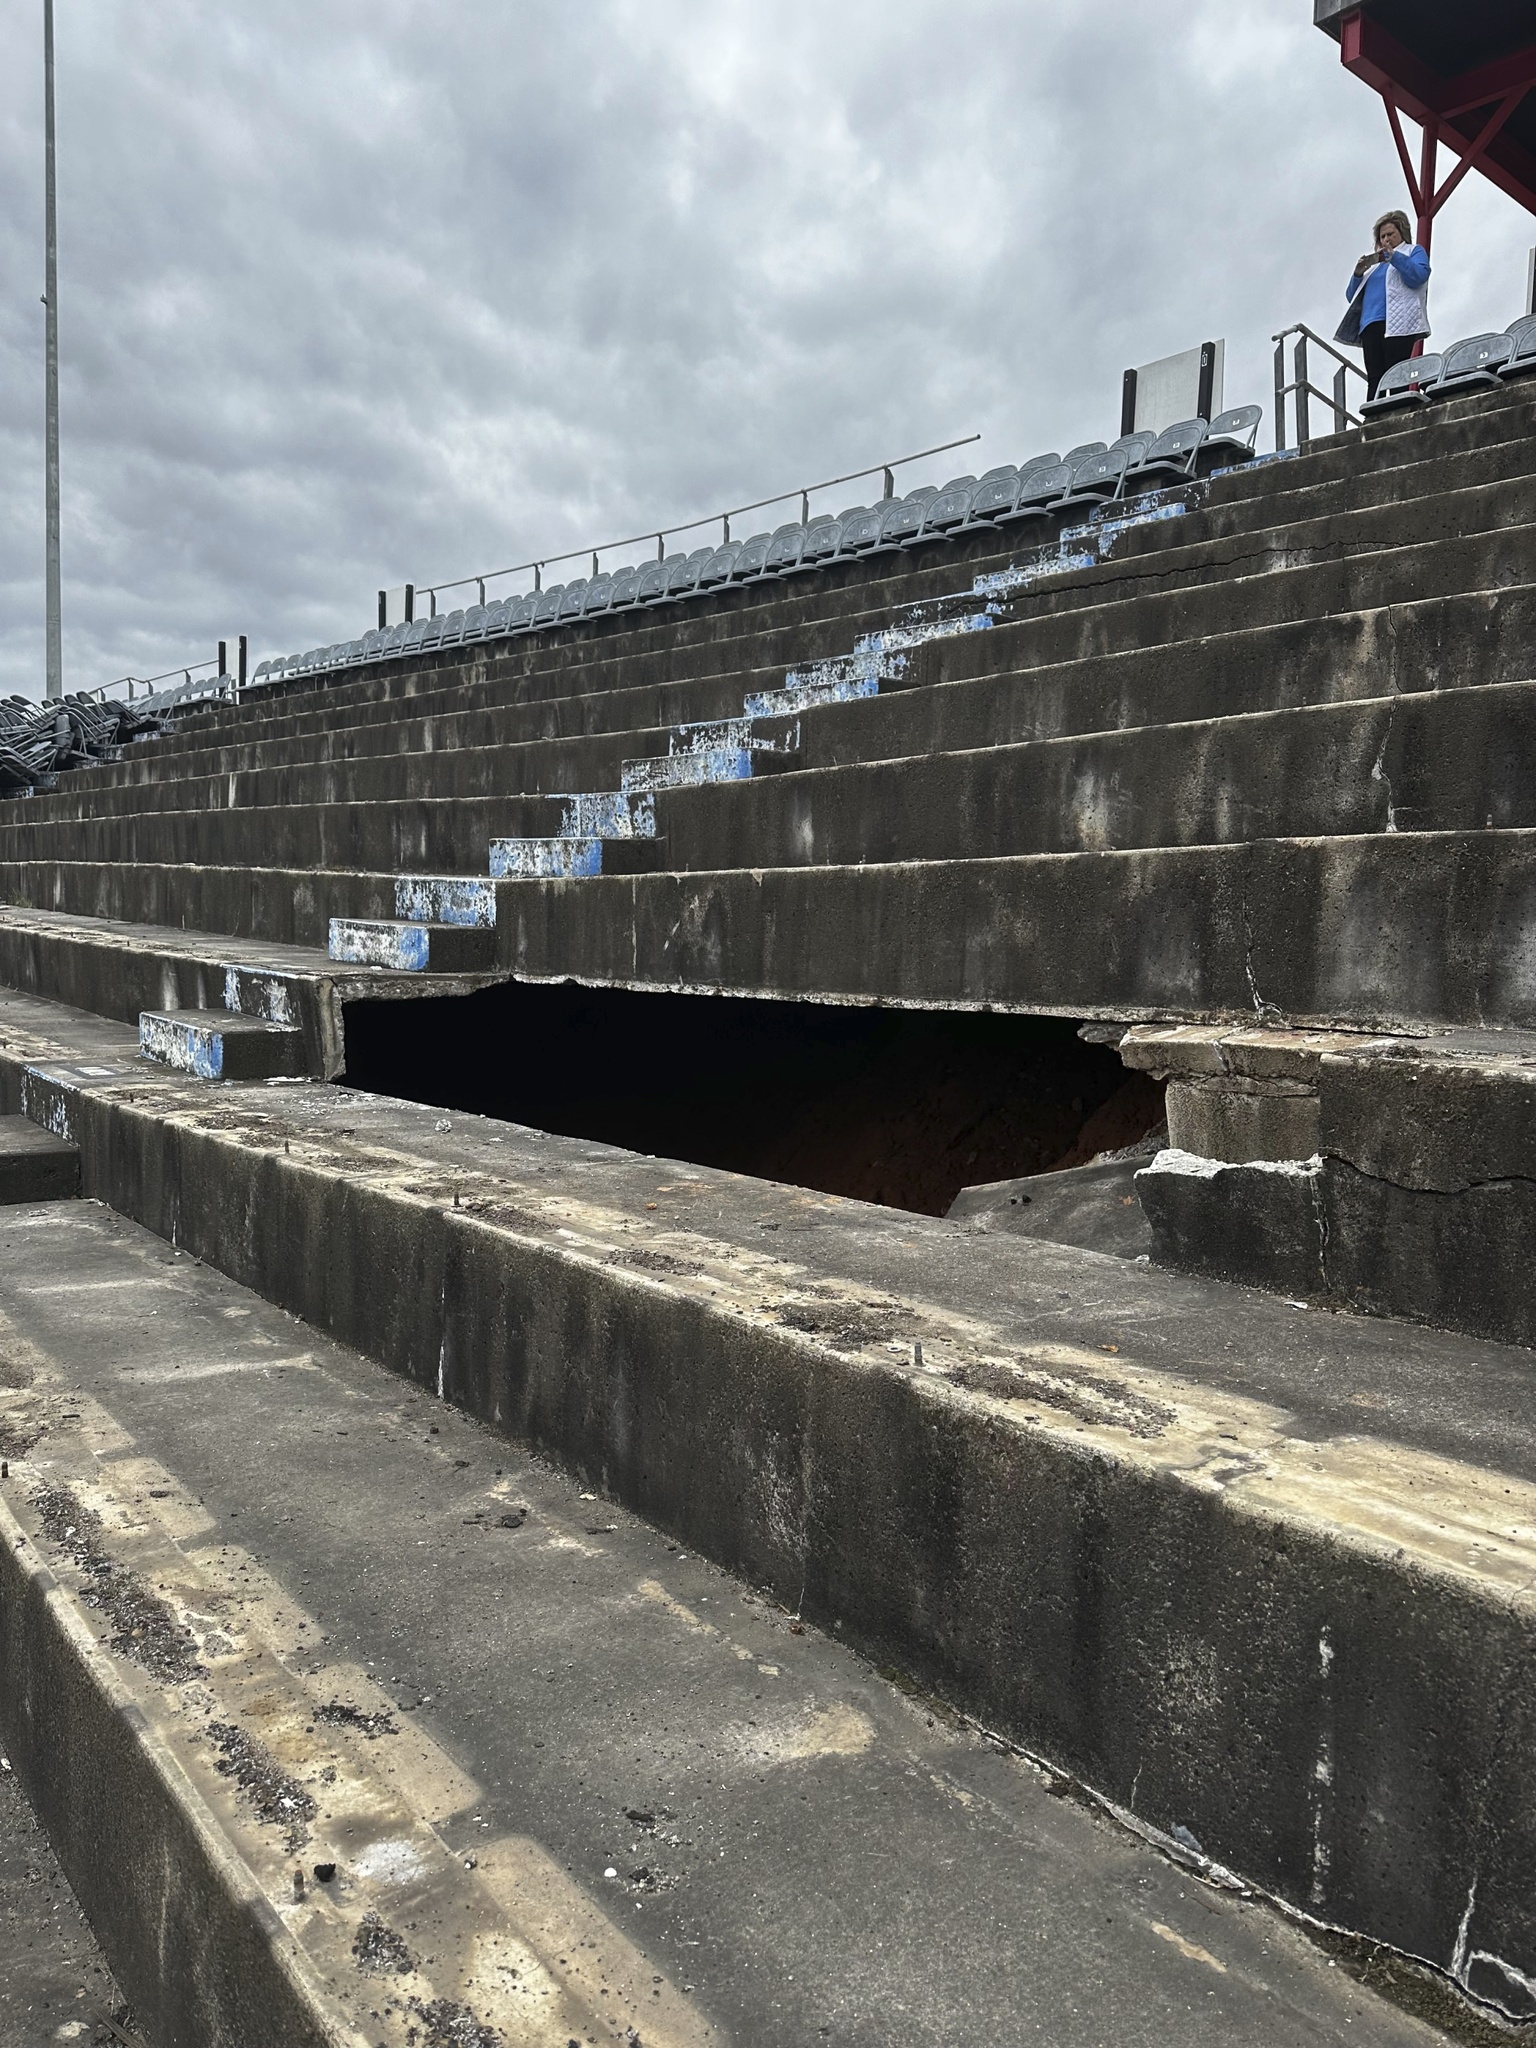 Sinkhole Unearths Rumored Moonshine Cave Underneath Frontstretch Grandstands at North Wilkesboro Speedway